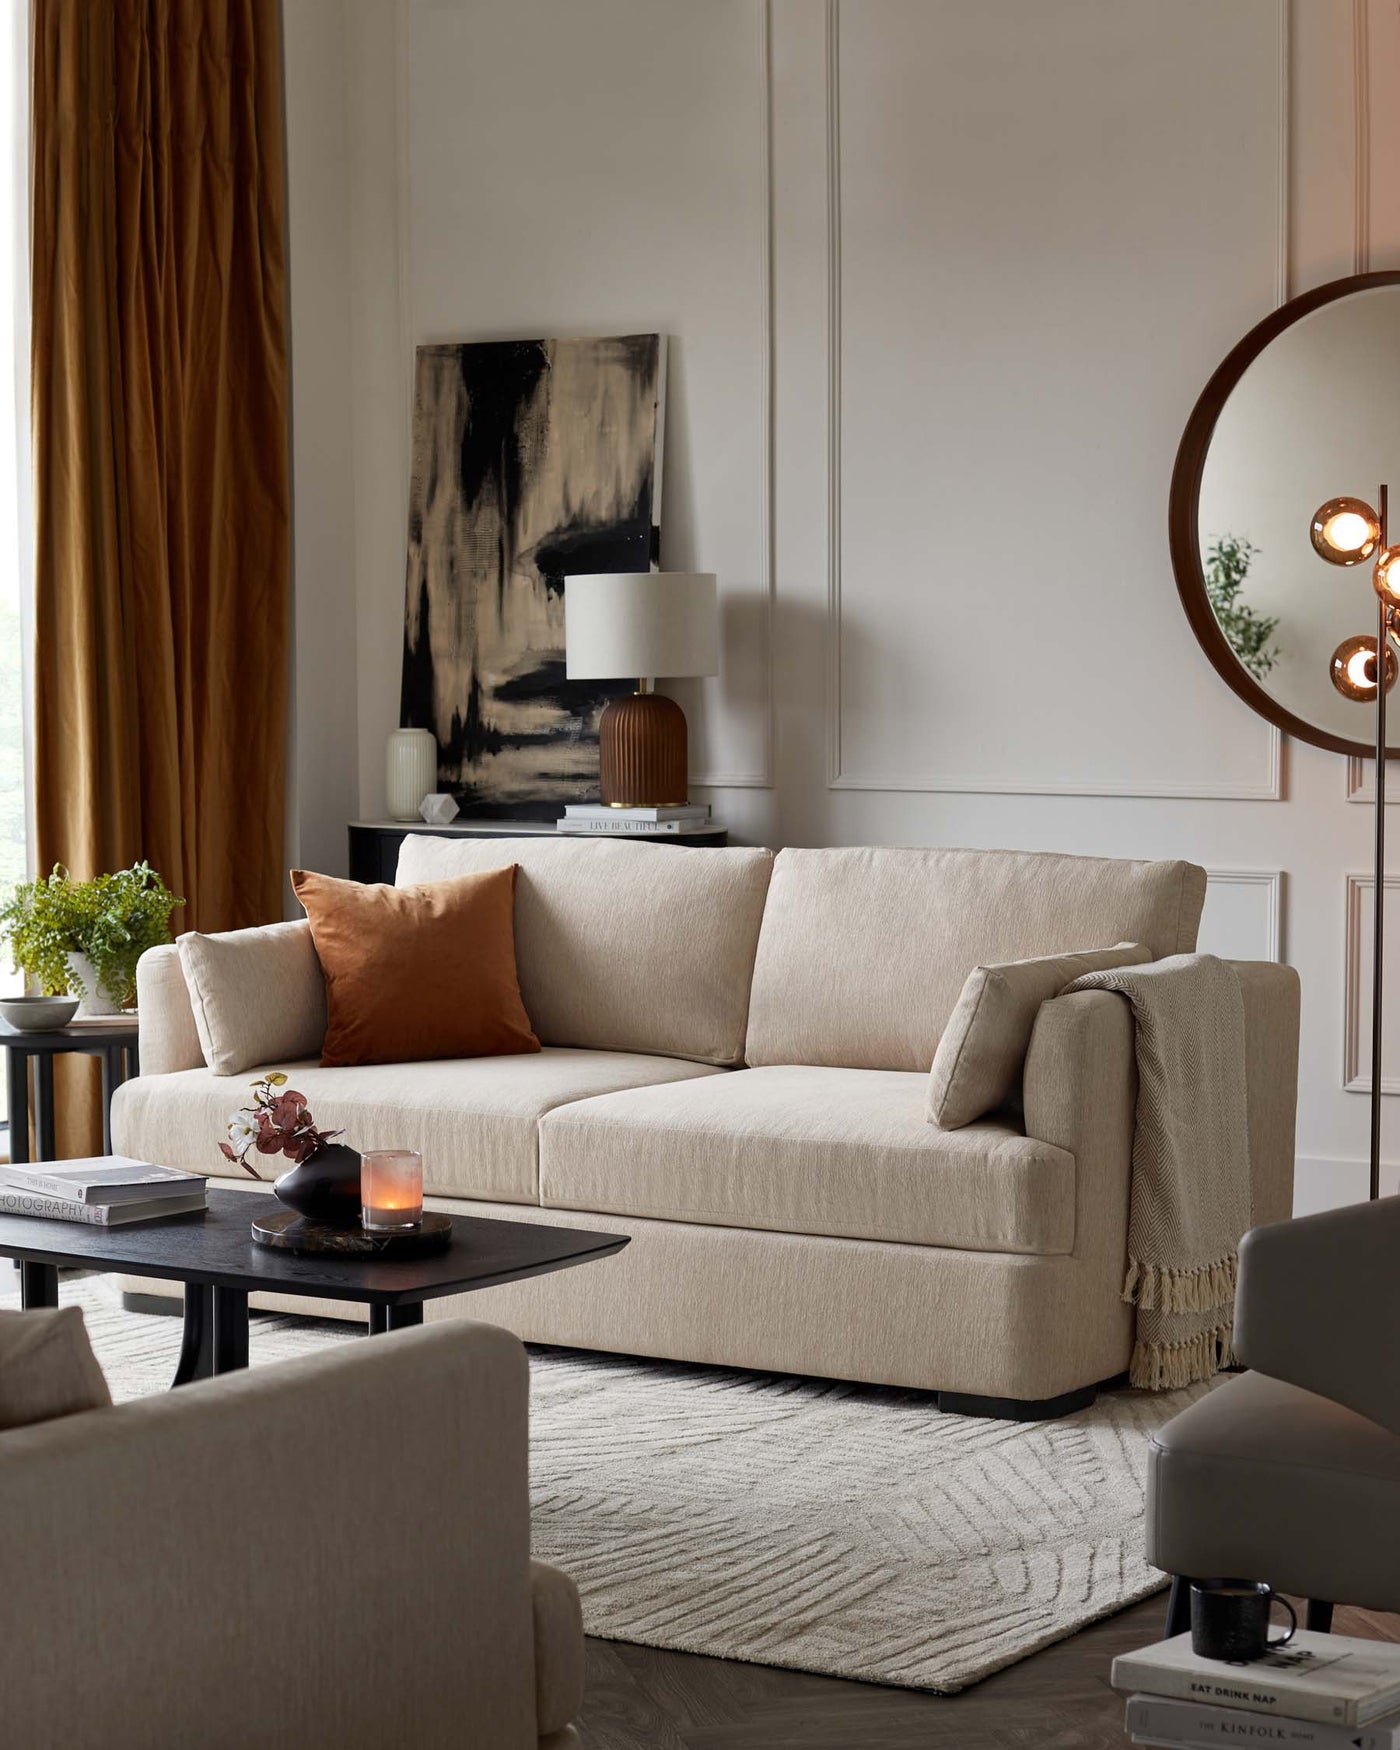 Contemporary beige three-seater sofa with clean lines and plush cushions, accented with a burnt orange throw pillow. In front, a low-profile oval-shaped coffee table in dark wood. To the side, a small round end table with a potted plant complements the space. A textured off-white area rug anchors the seating arrangement, while an armchair facing the sofa completes the setting. Elegant drapery, modern art, and a round wall mirror enhance the room's sophisticated aesthetic.